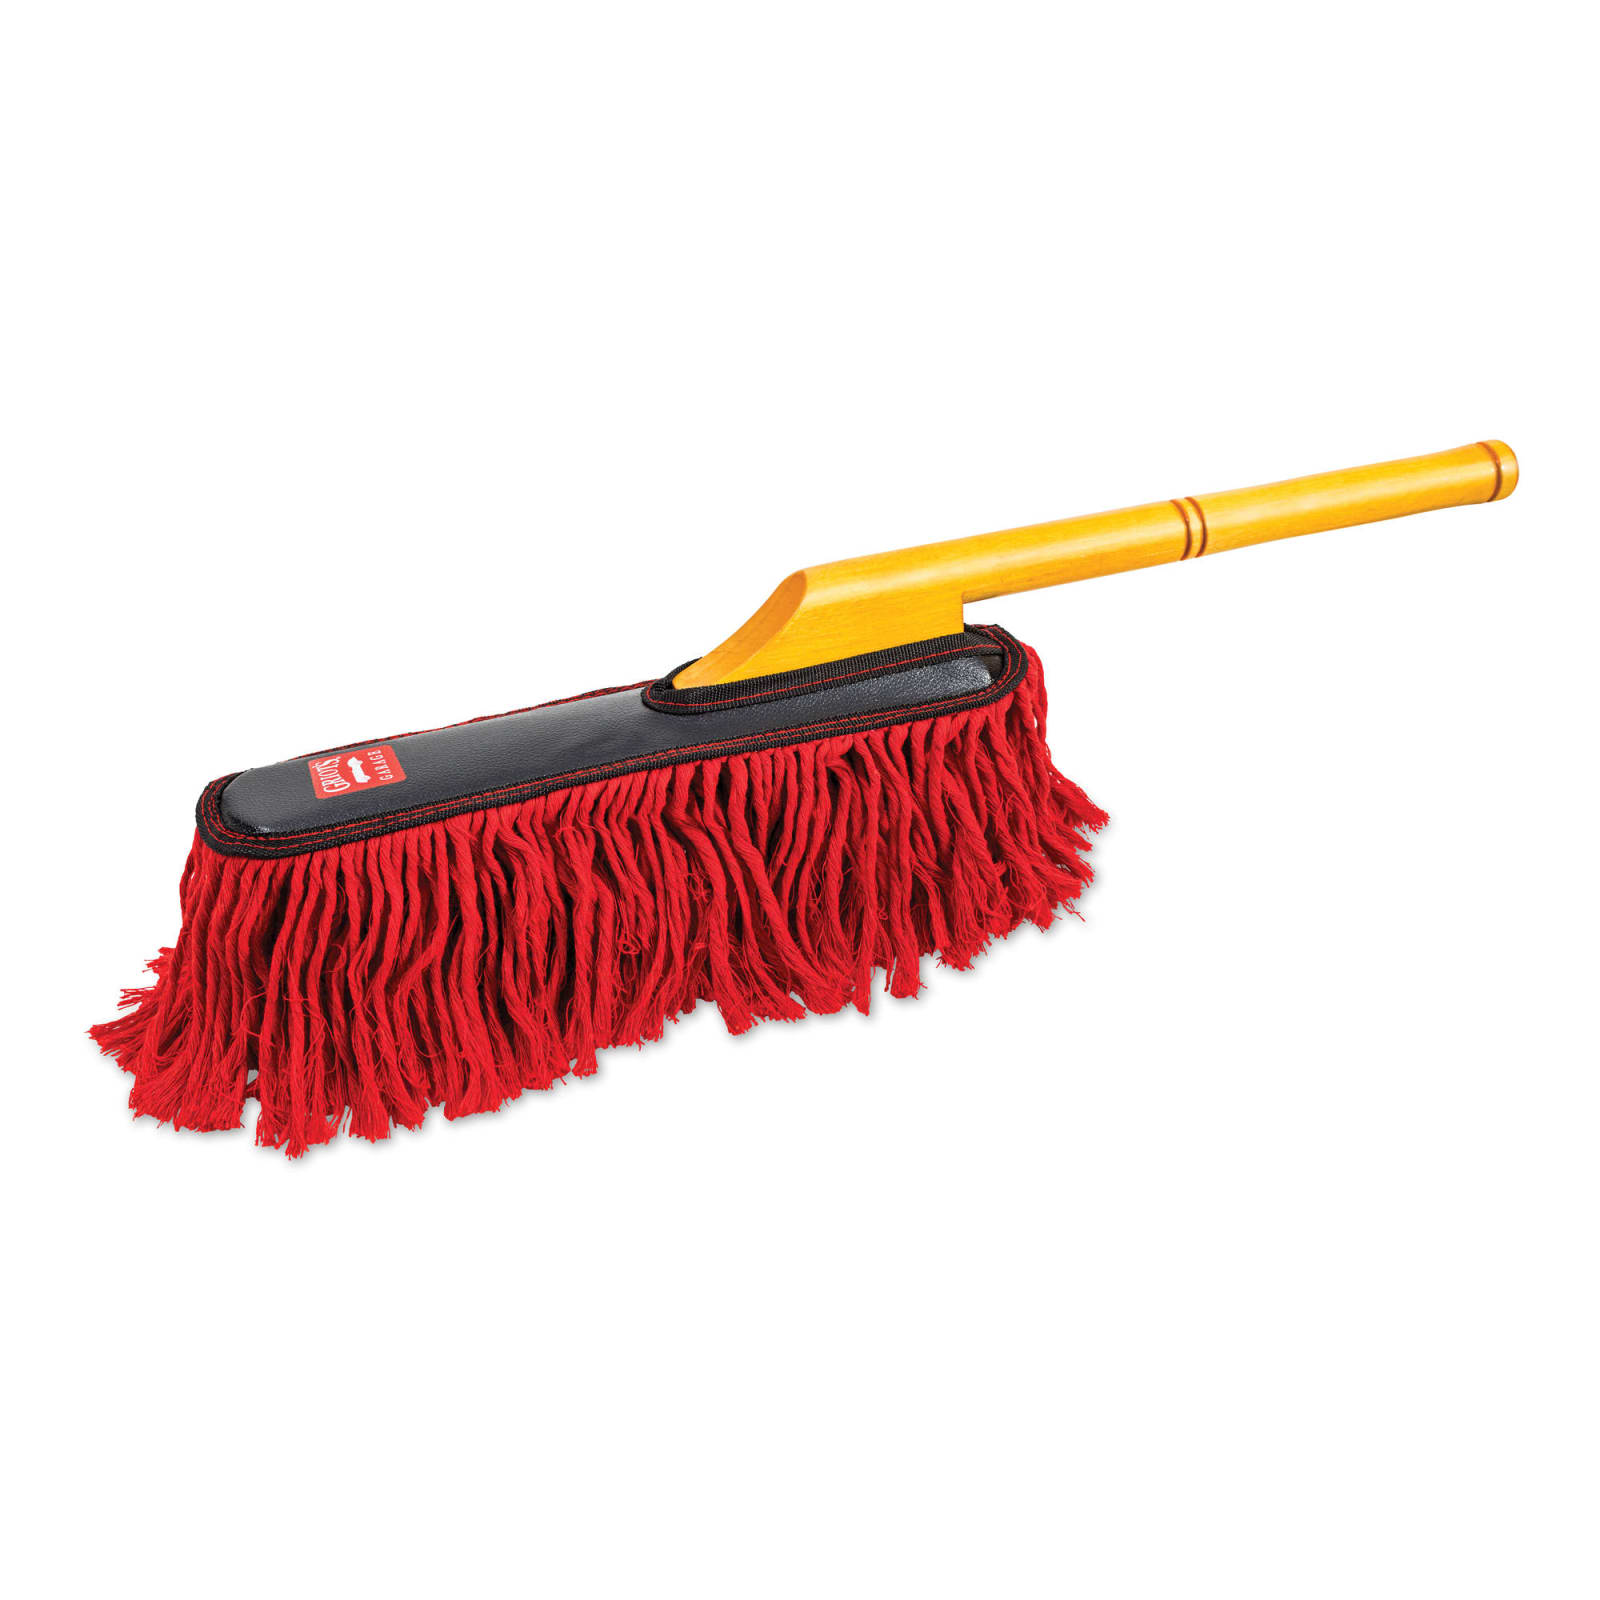 The Original California Car Duster Wood Handle and Soft Cotton Mop